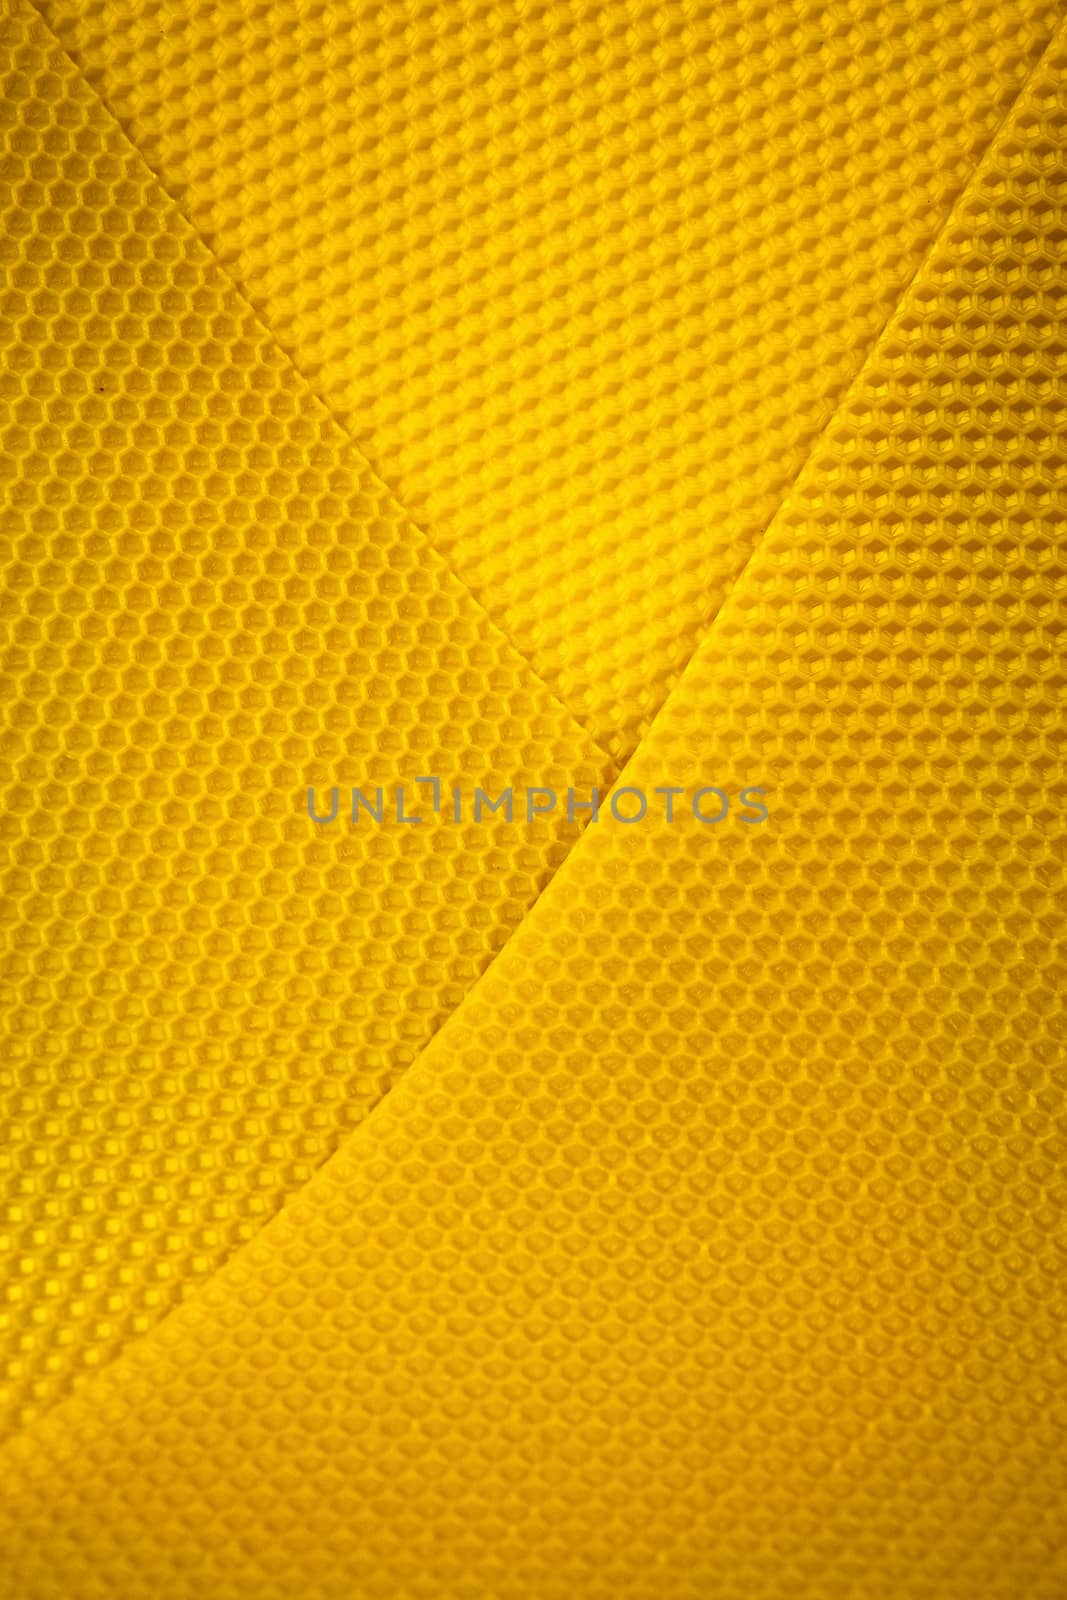 abstract background or texture background of yellow wax honeycomb